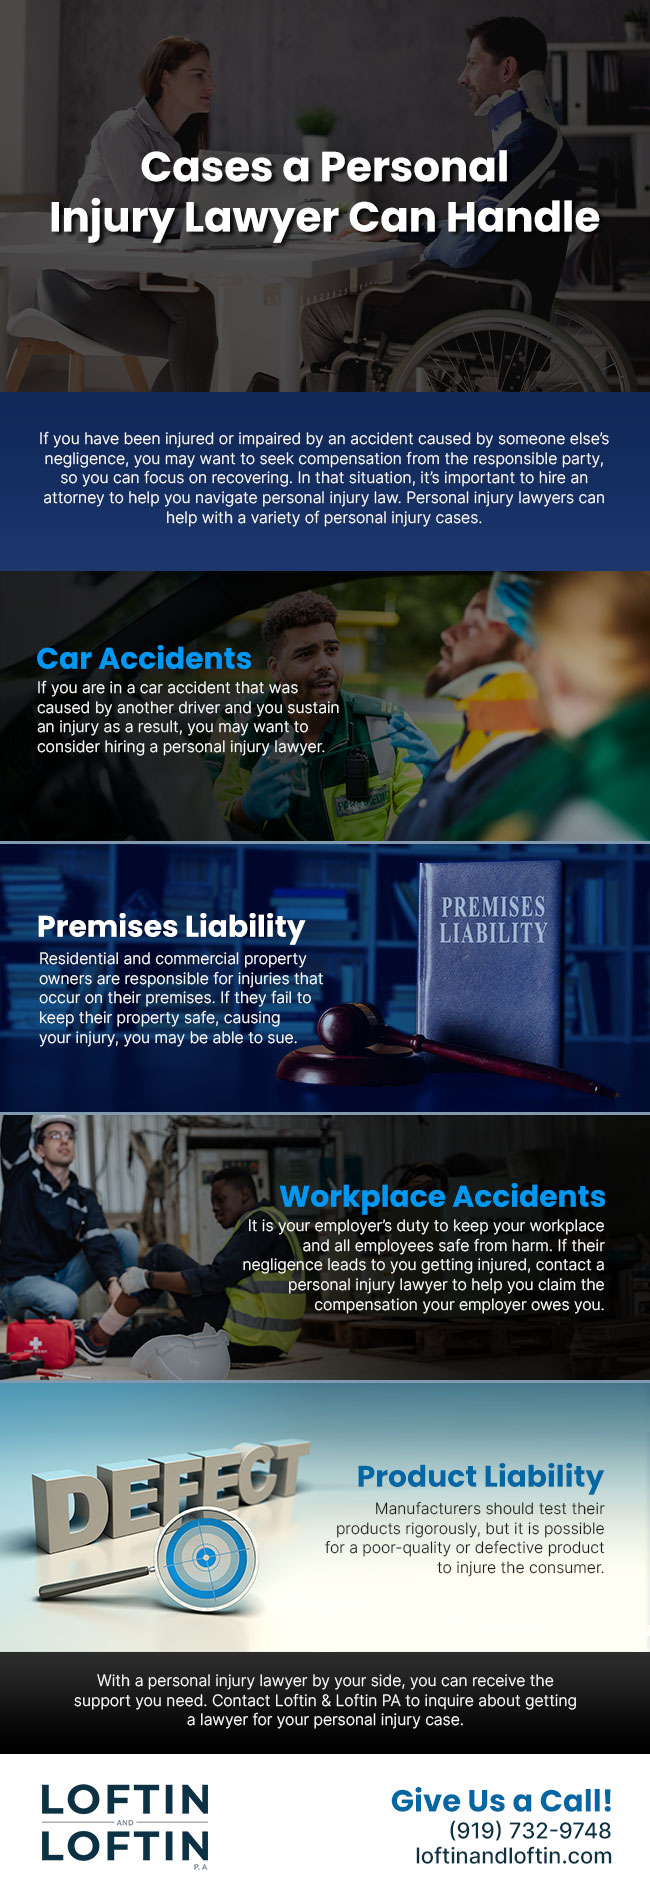 Cases a Personal Injury Lawyer Can Handle